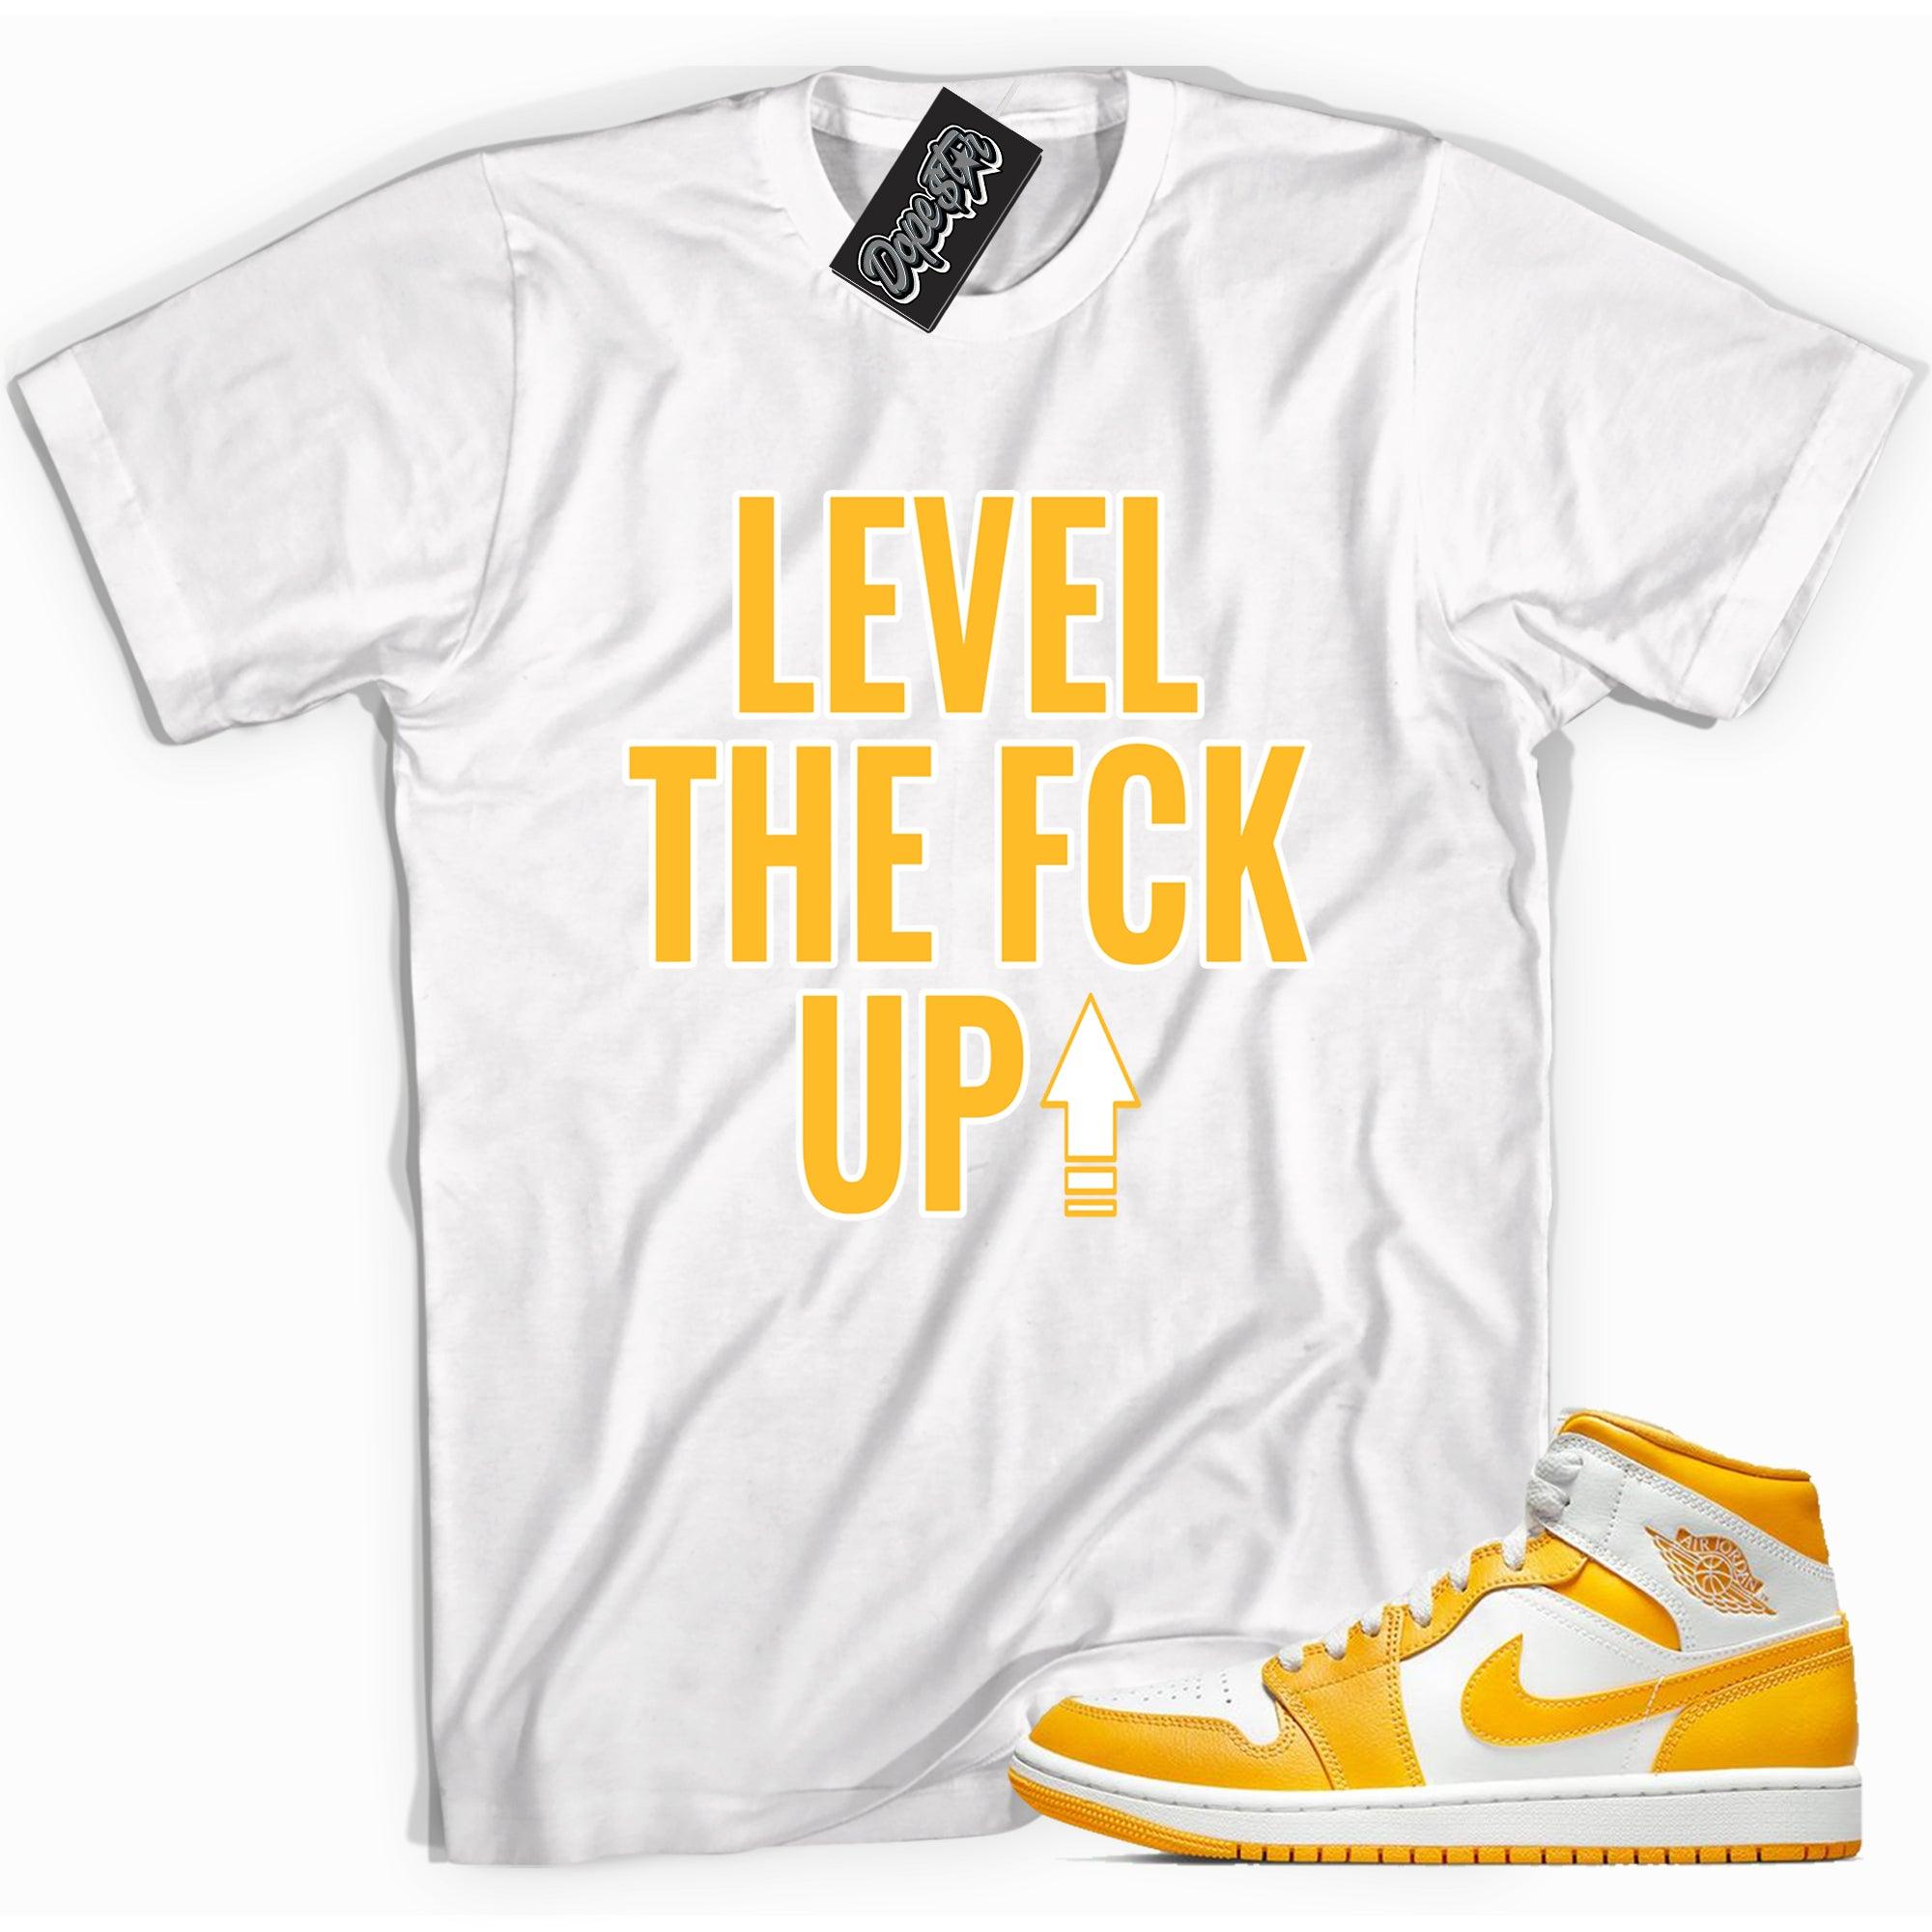 Cool white graphic tee with 'Level Up' print, that perfectly matches Air Jordan 1 Mid White University Gold sneakers.